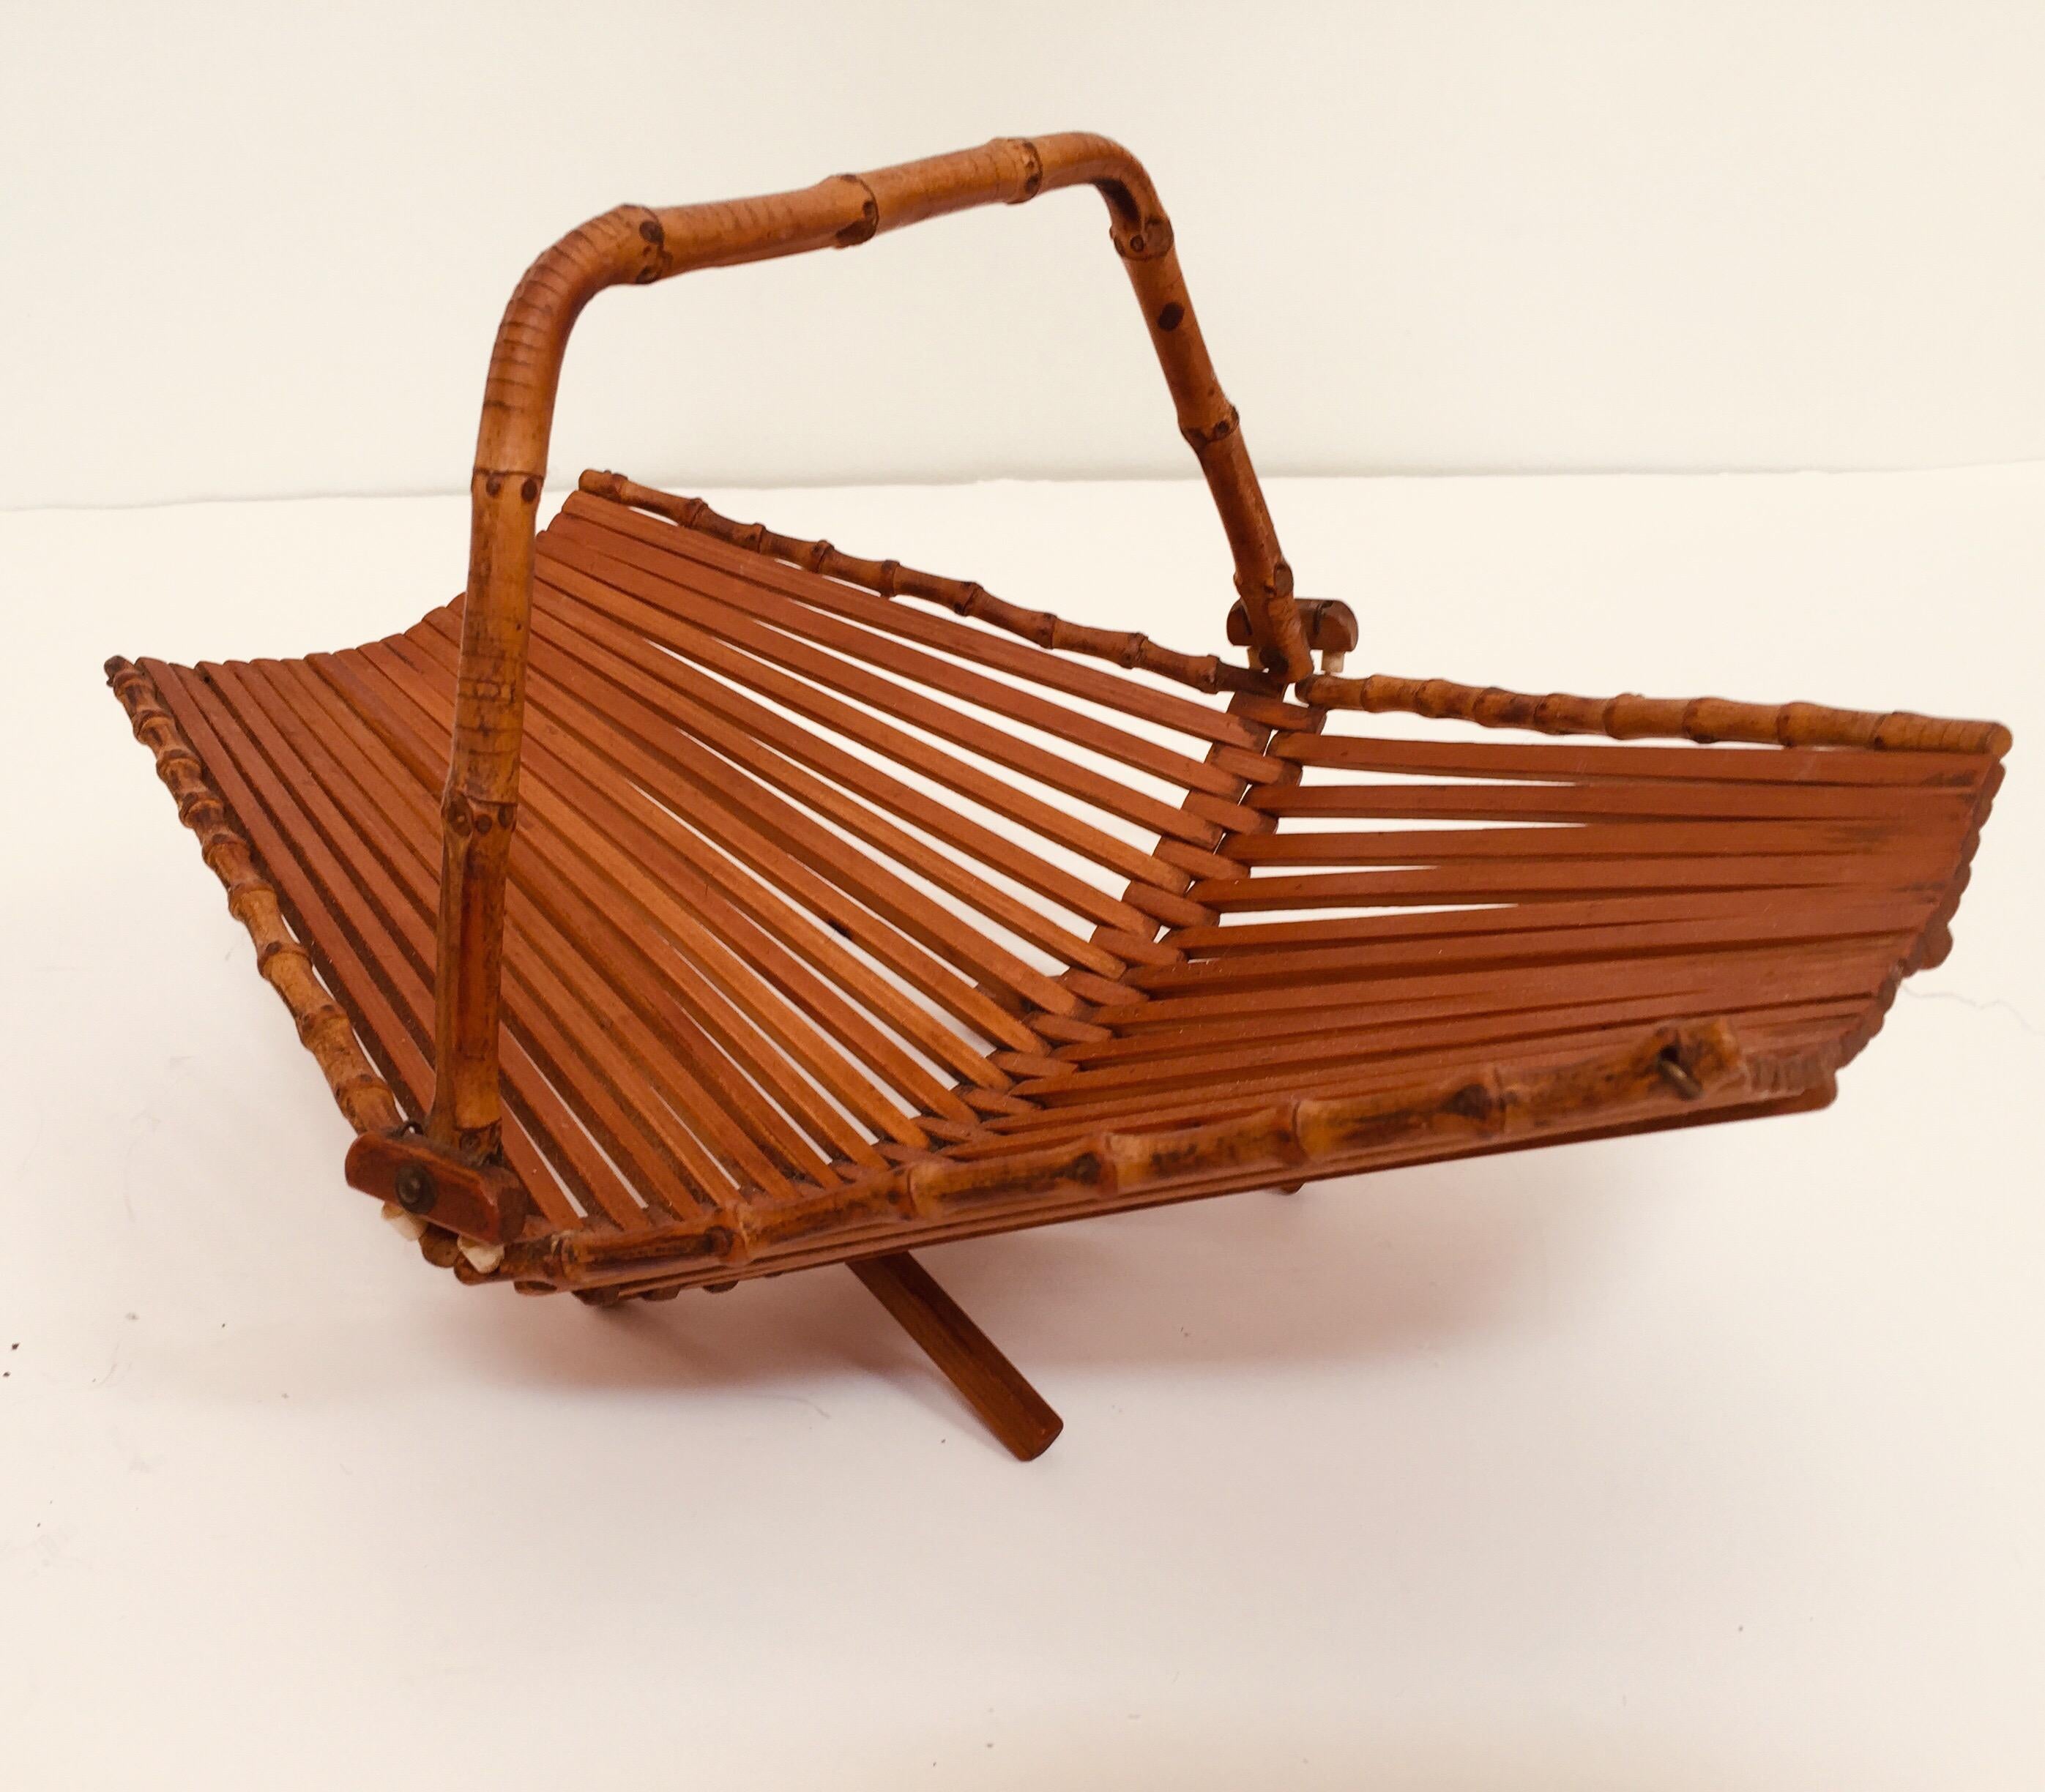 Vintage midcentury bamboo fruit basket.
Wood cane flowers rustic basket, great for fruits, bread or pastries .
 Made in Japan, 
circa 1970s.